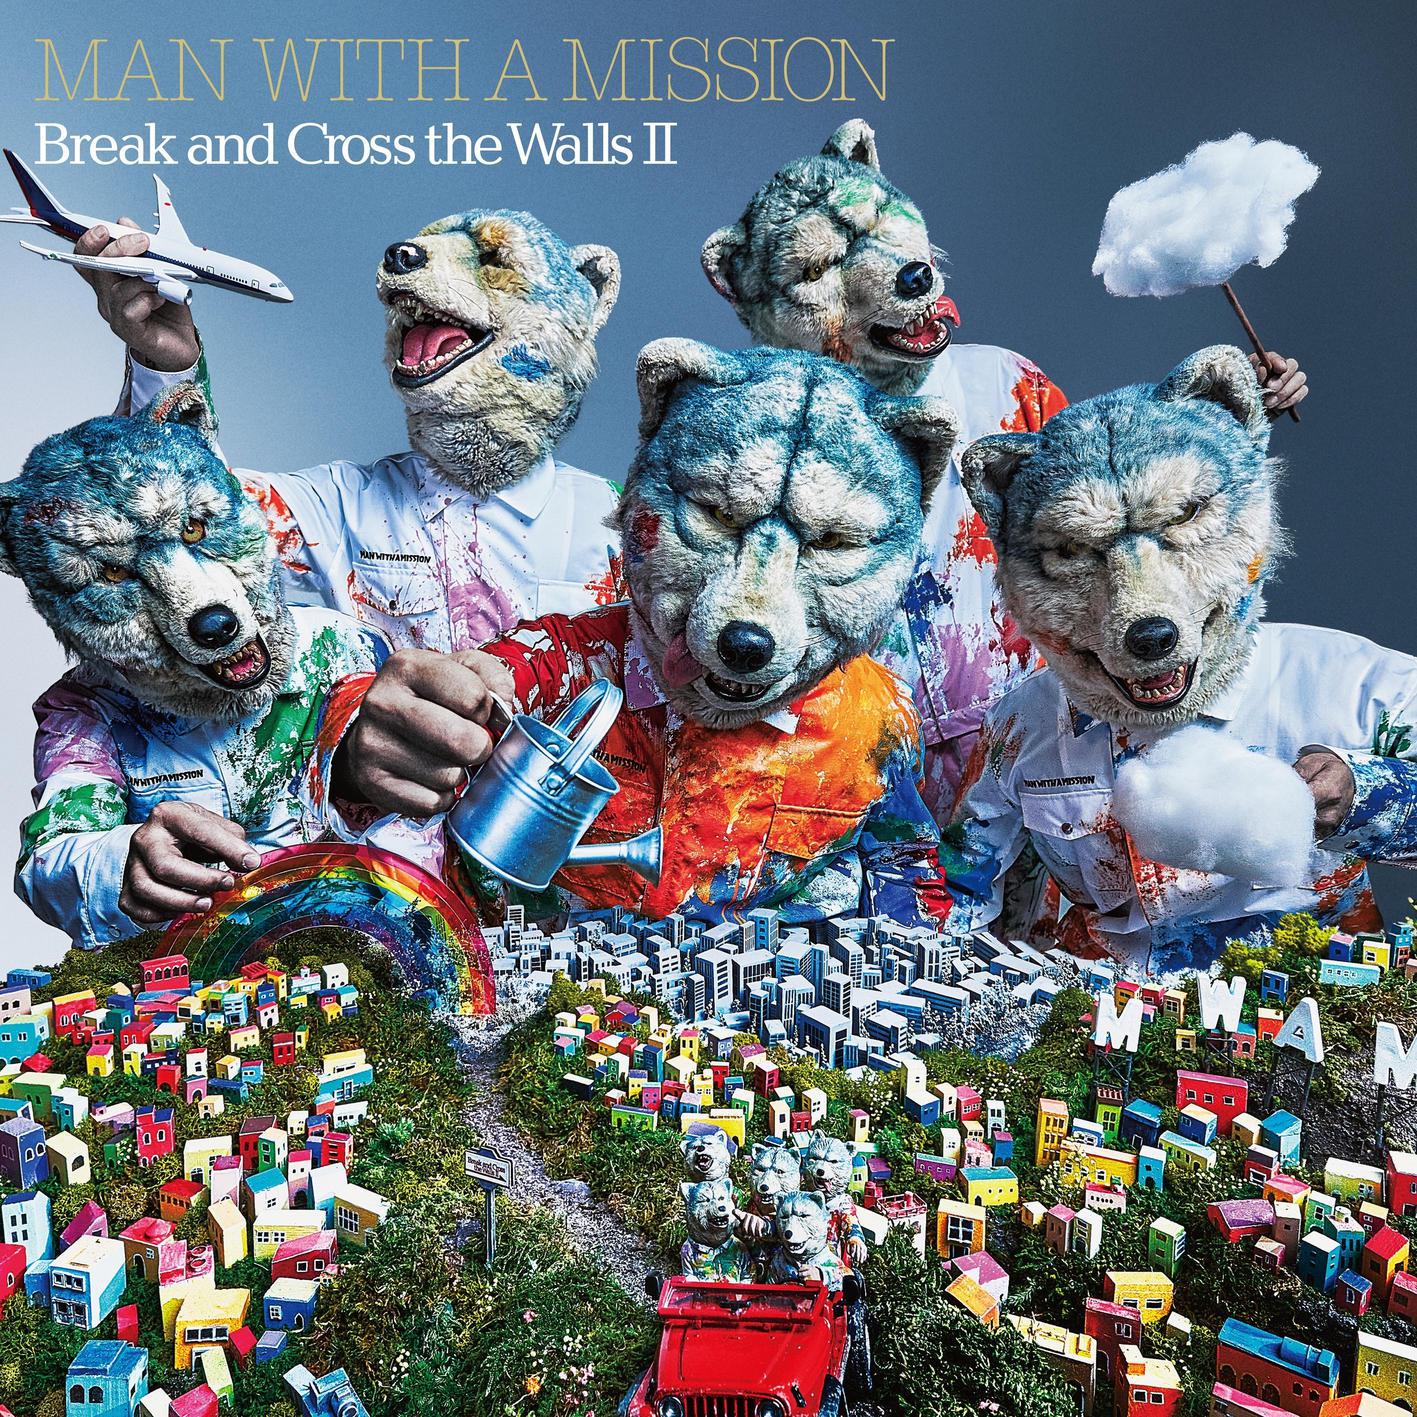 MAN WITH A MISSION - All You Need